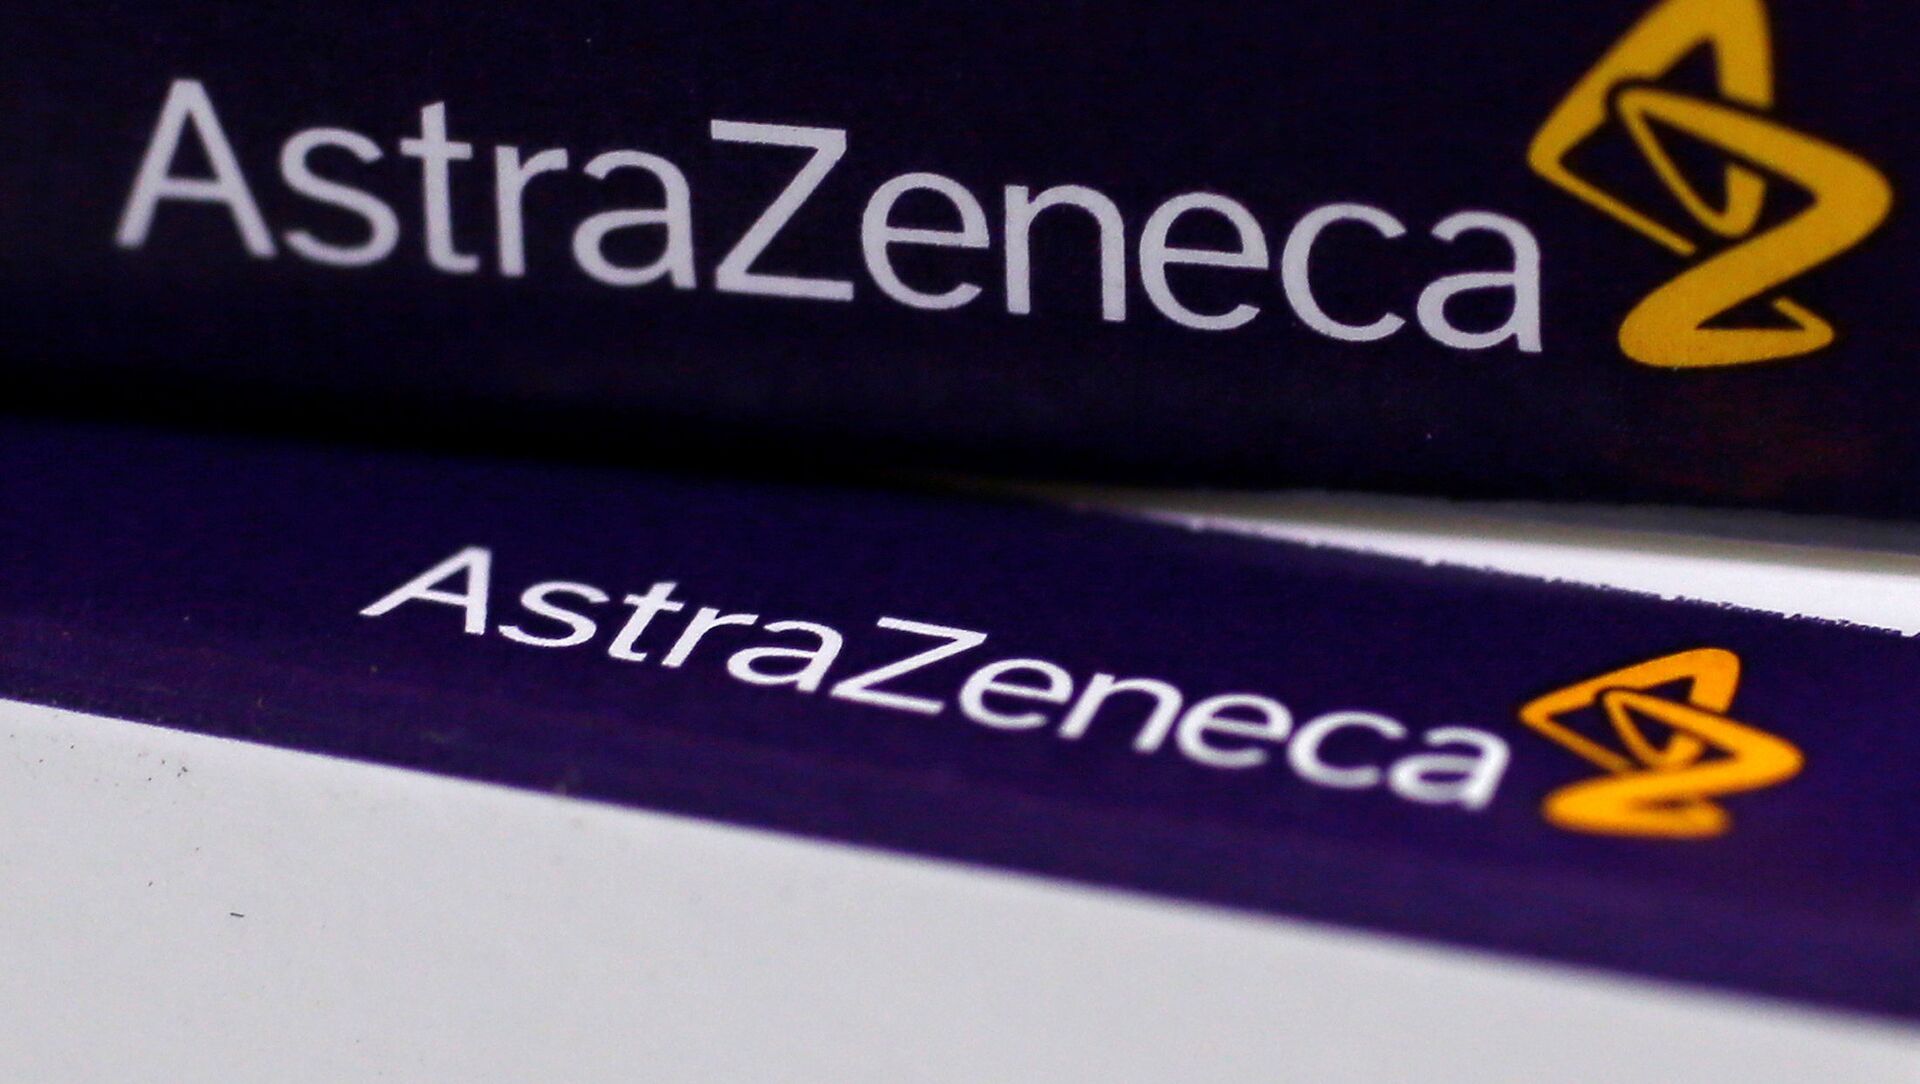 FILE PHOTO:The logo of AstraZeneca is seen on medication packages in a pharmacy in London. - Sputnik 日本, 1920, 08.03.2021